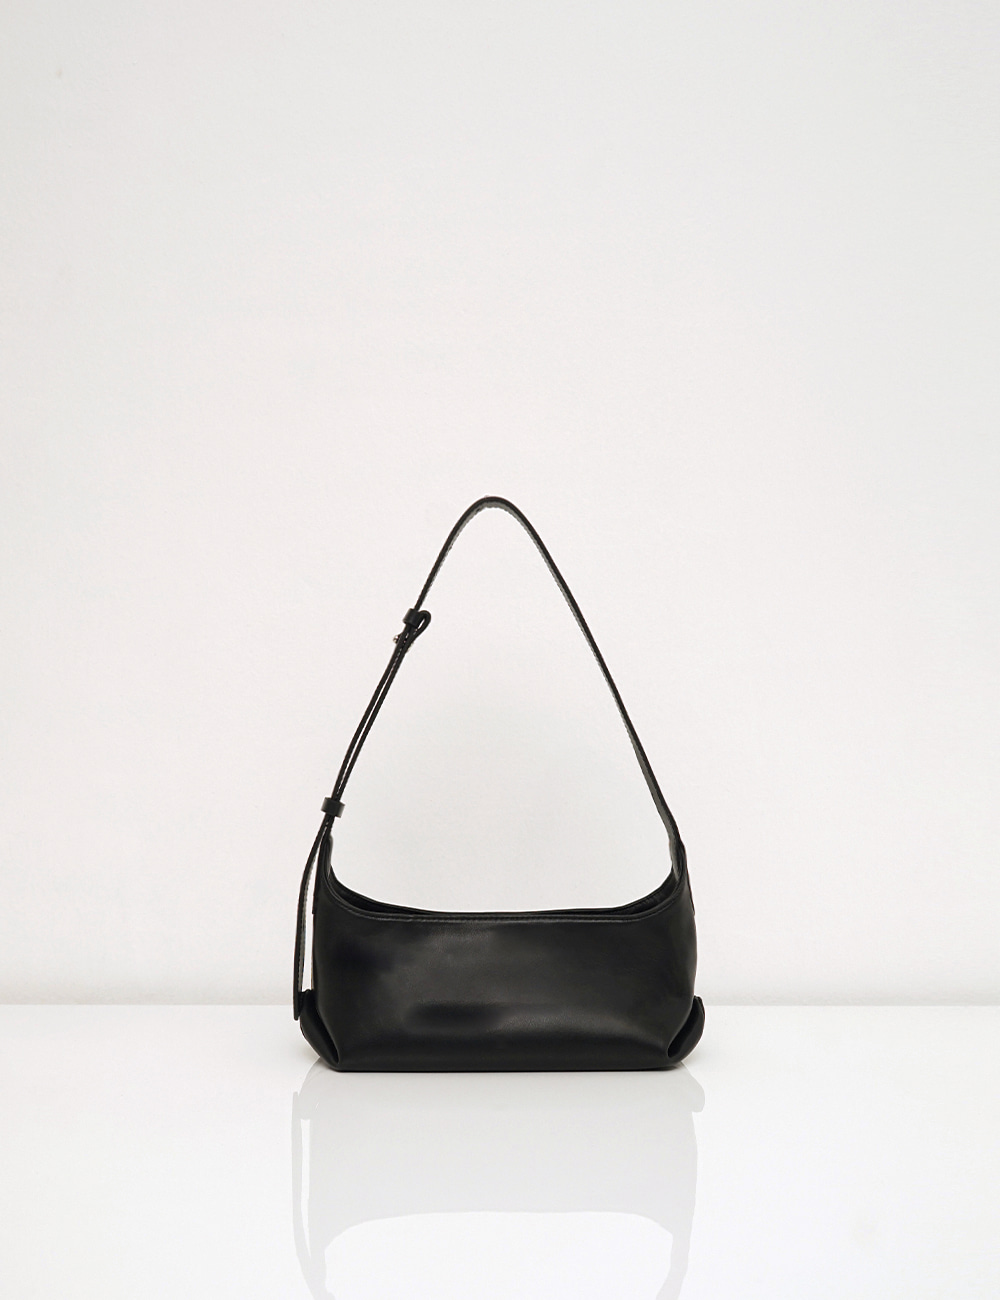 Bote bag / black (sold out)